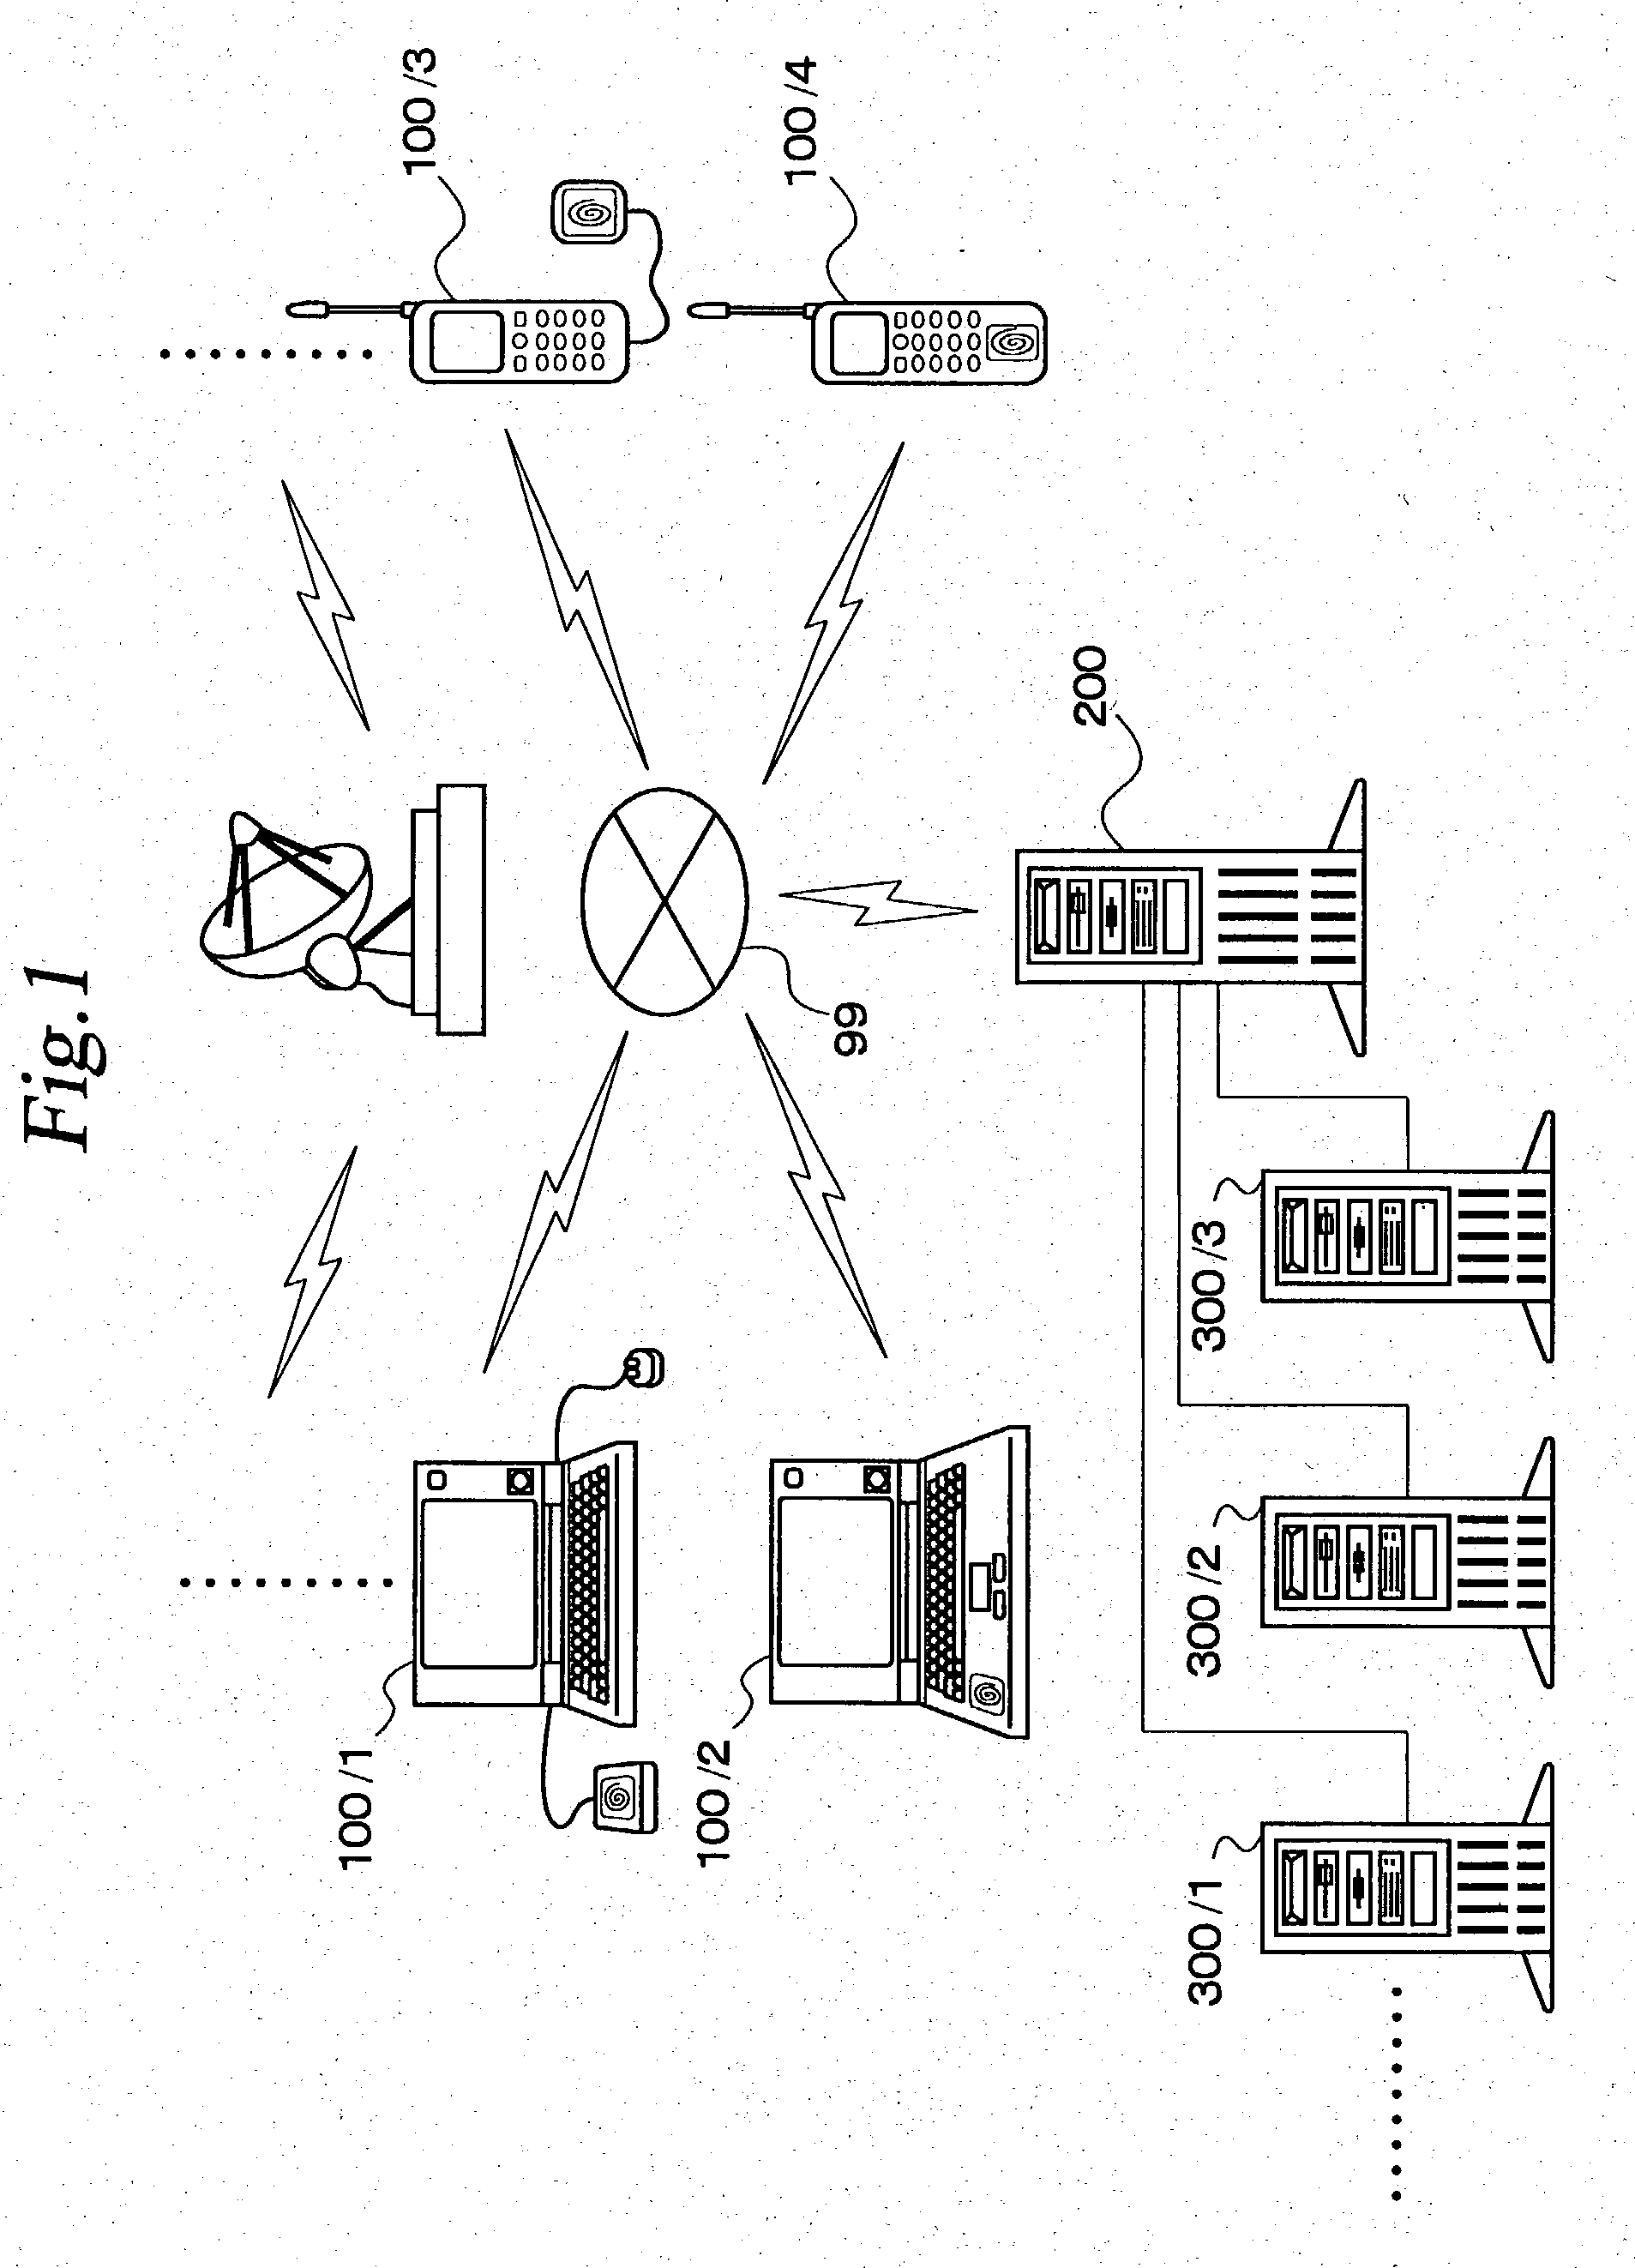 Electronic money issuing system